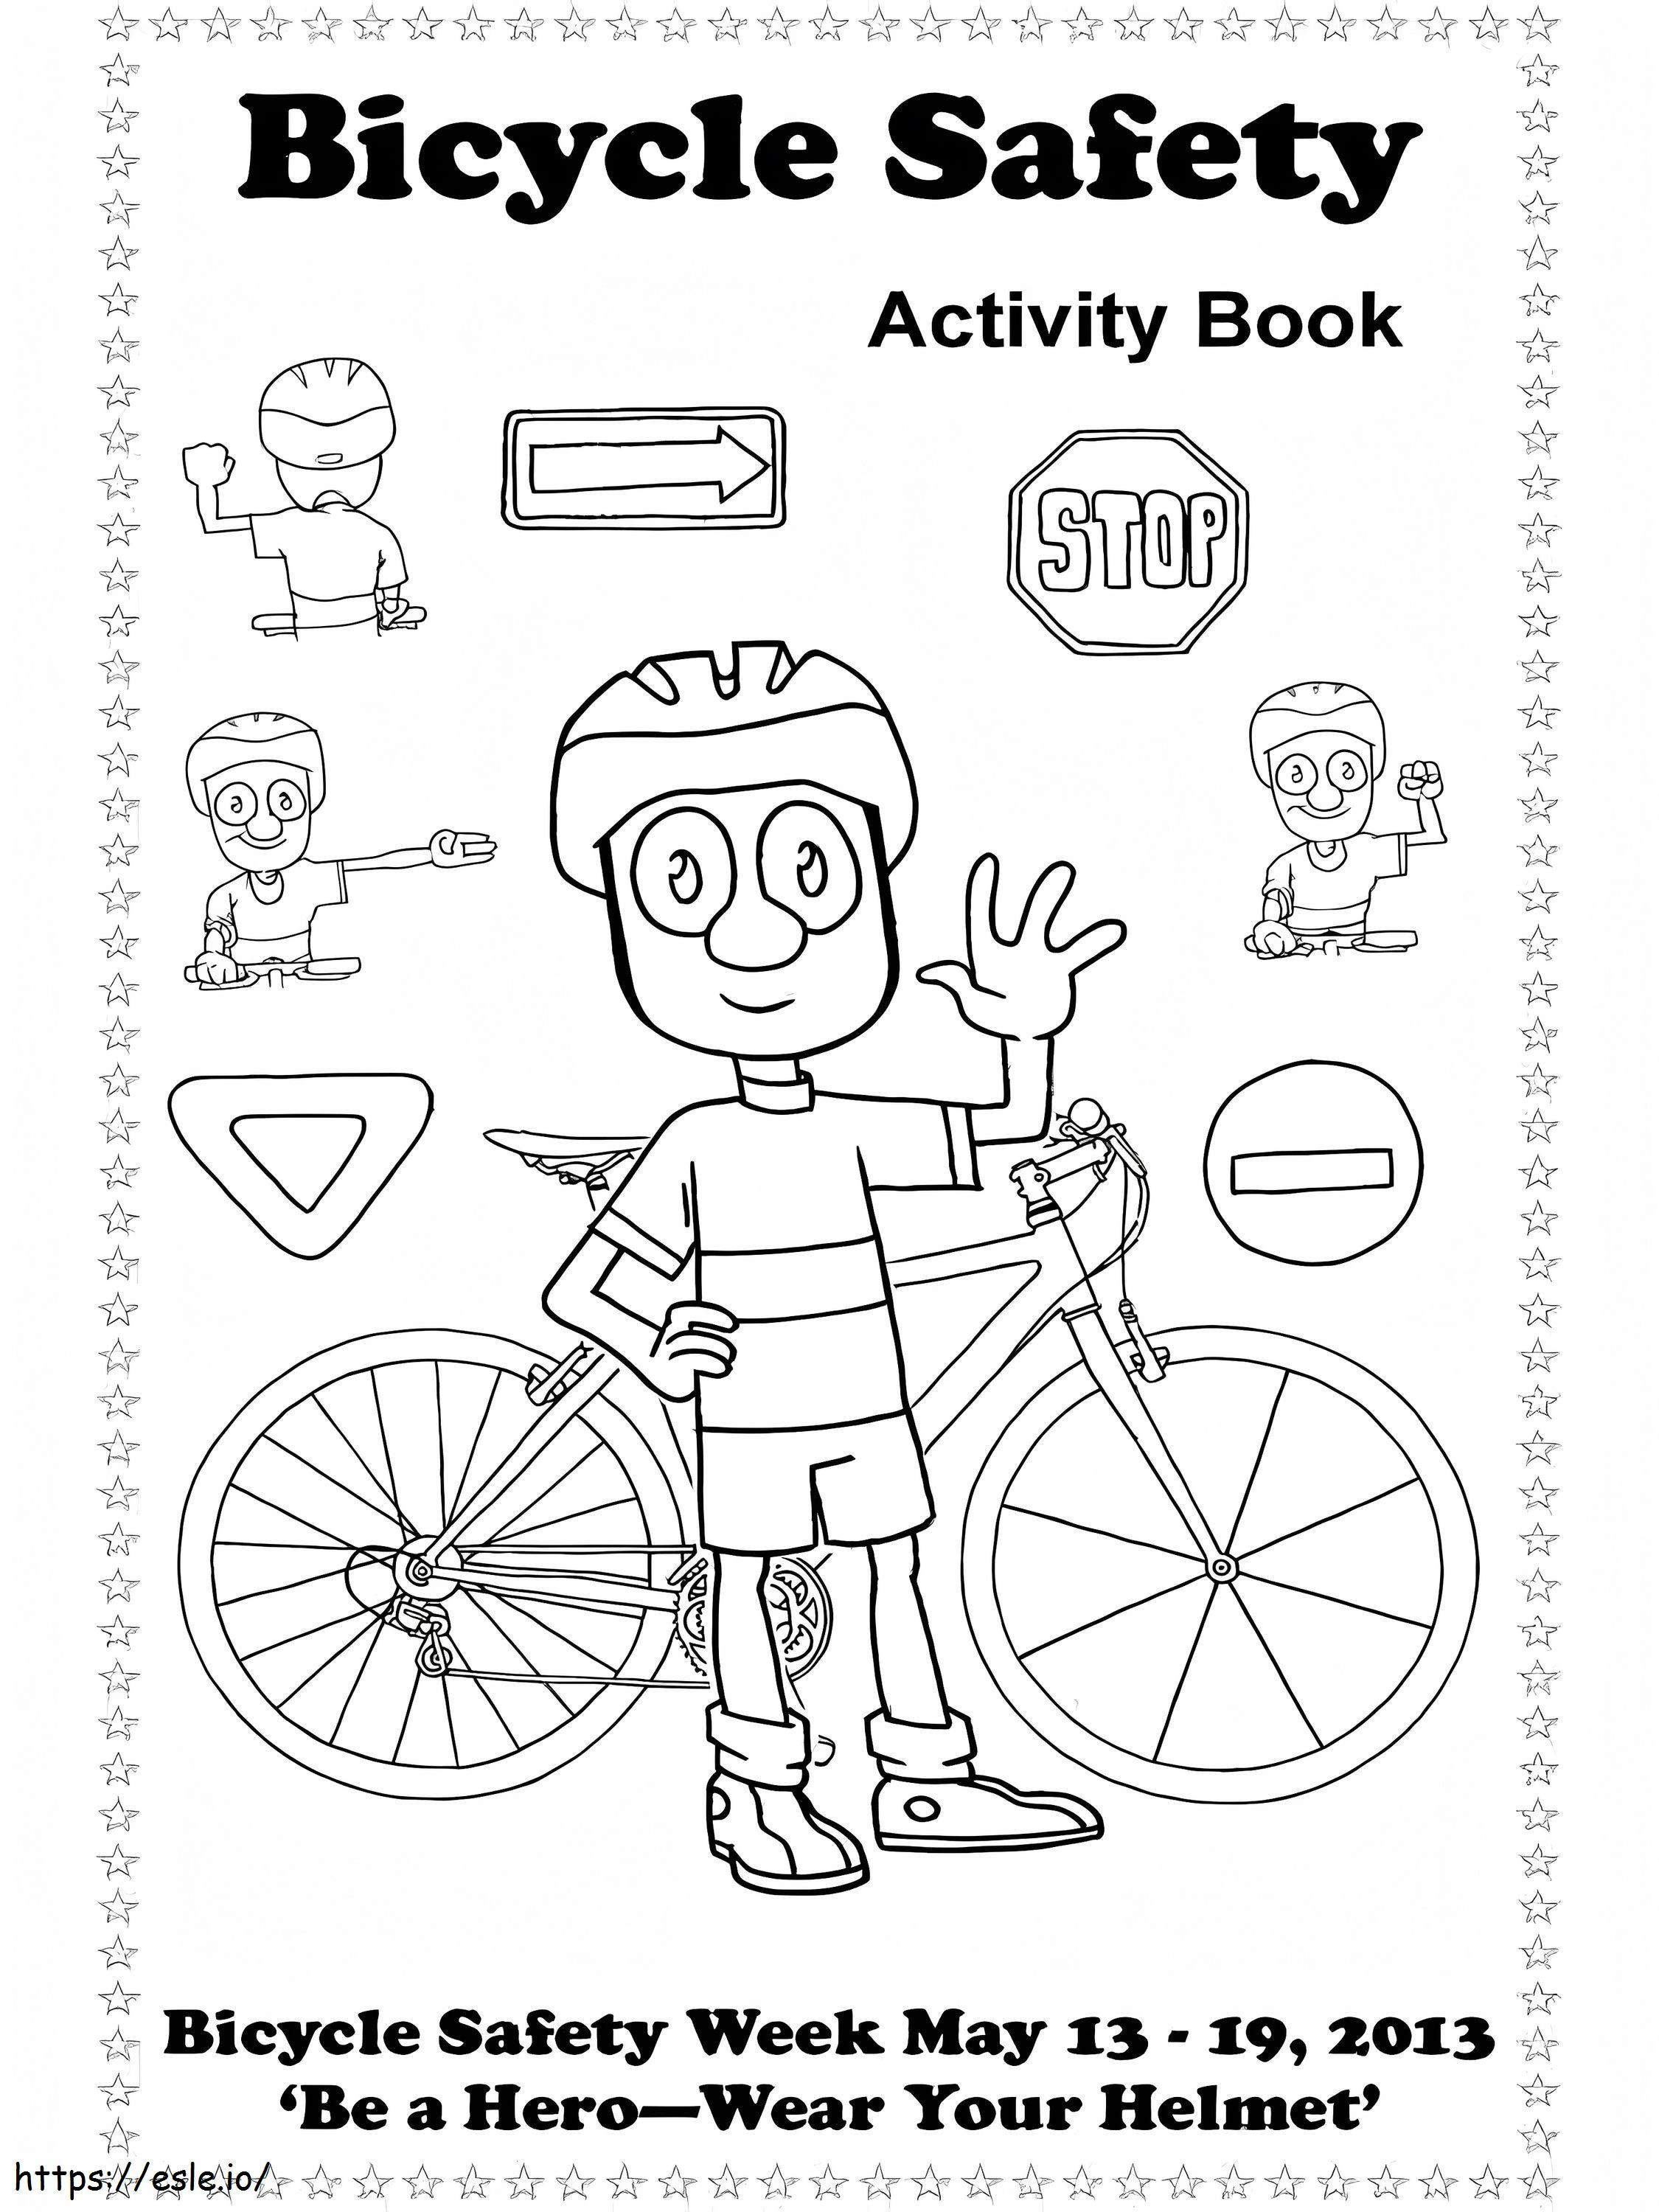 Wear Your Helmet Bicycle Safety coloring page